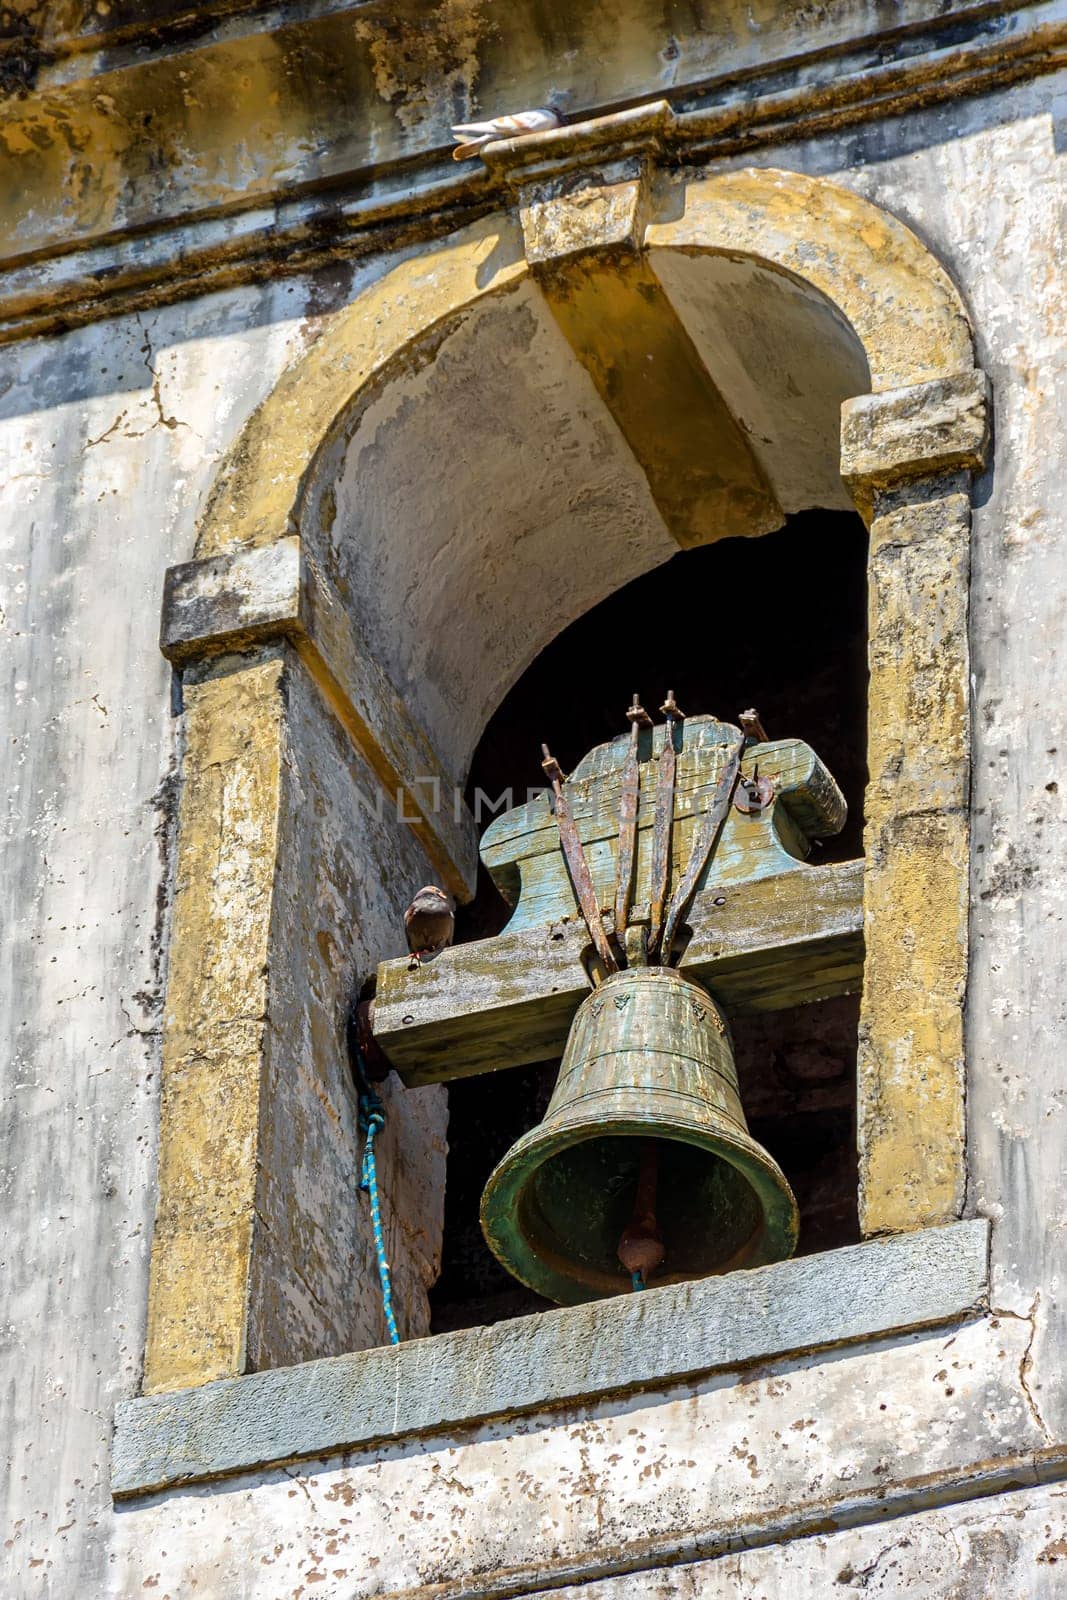 Colonial-style church tower with old bell by Fred_Pinheiro